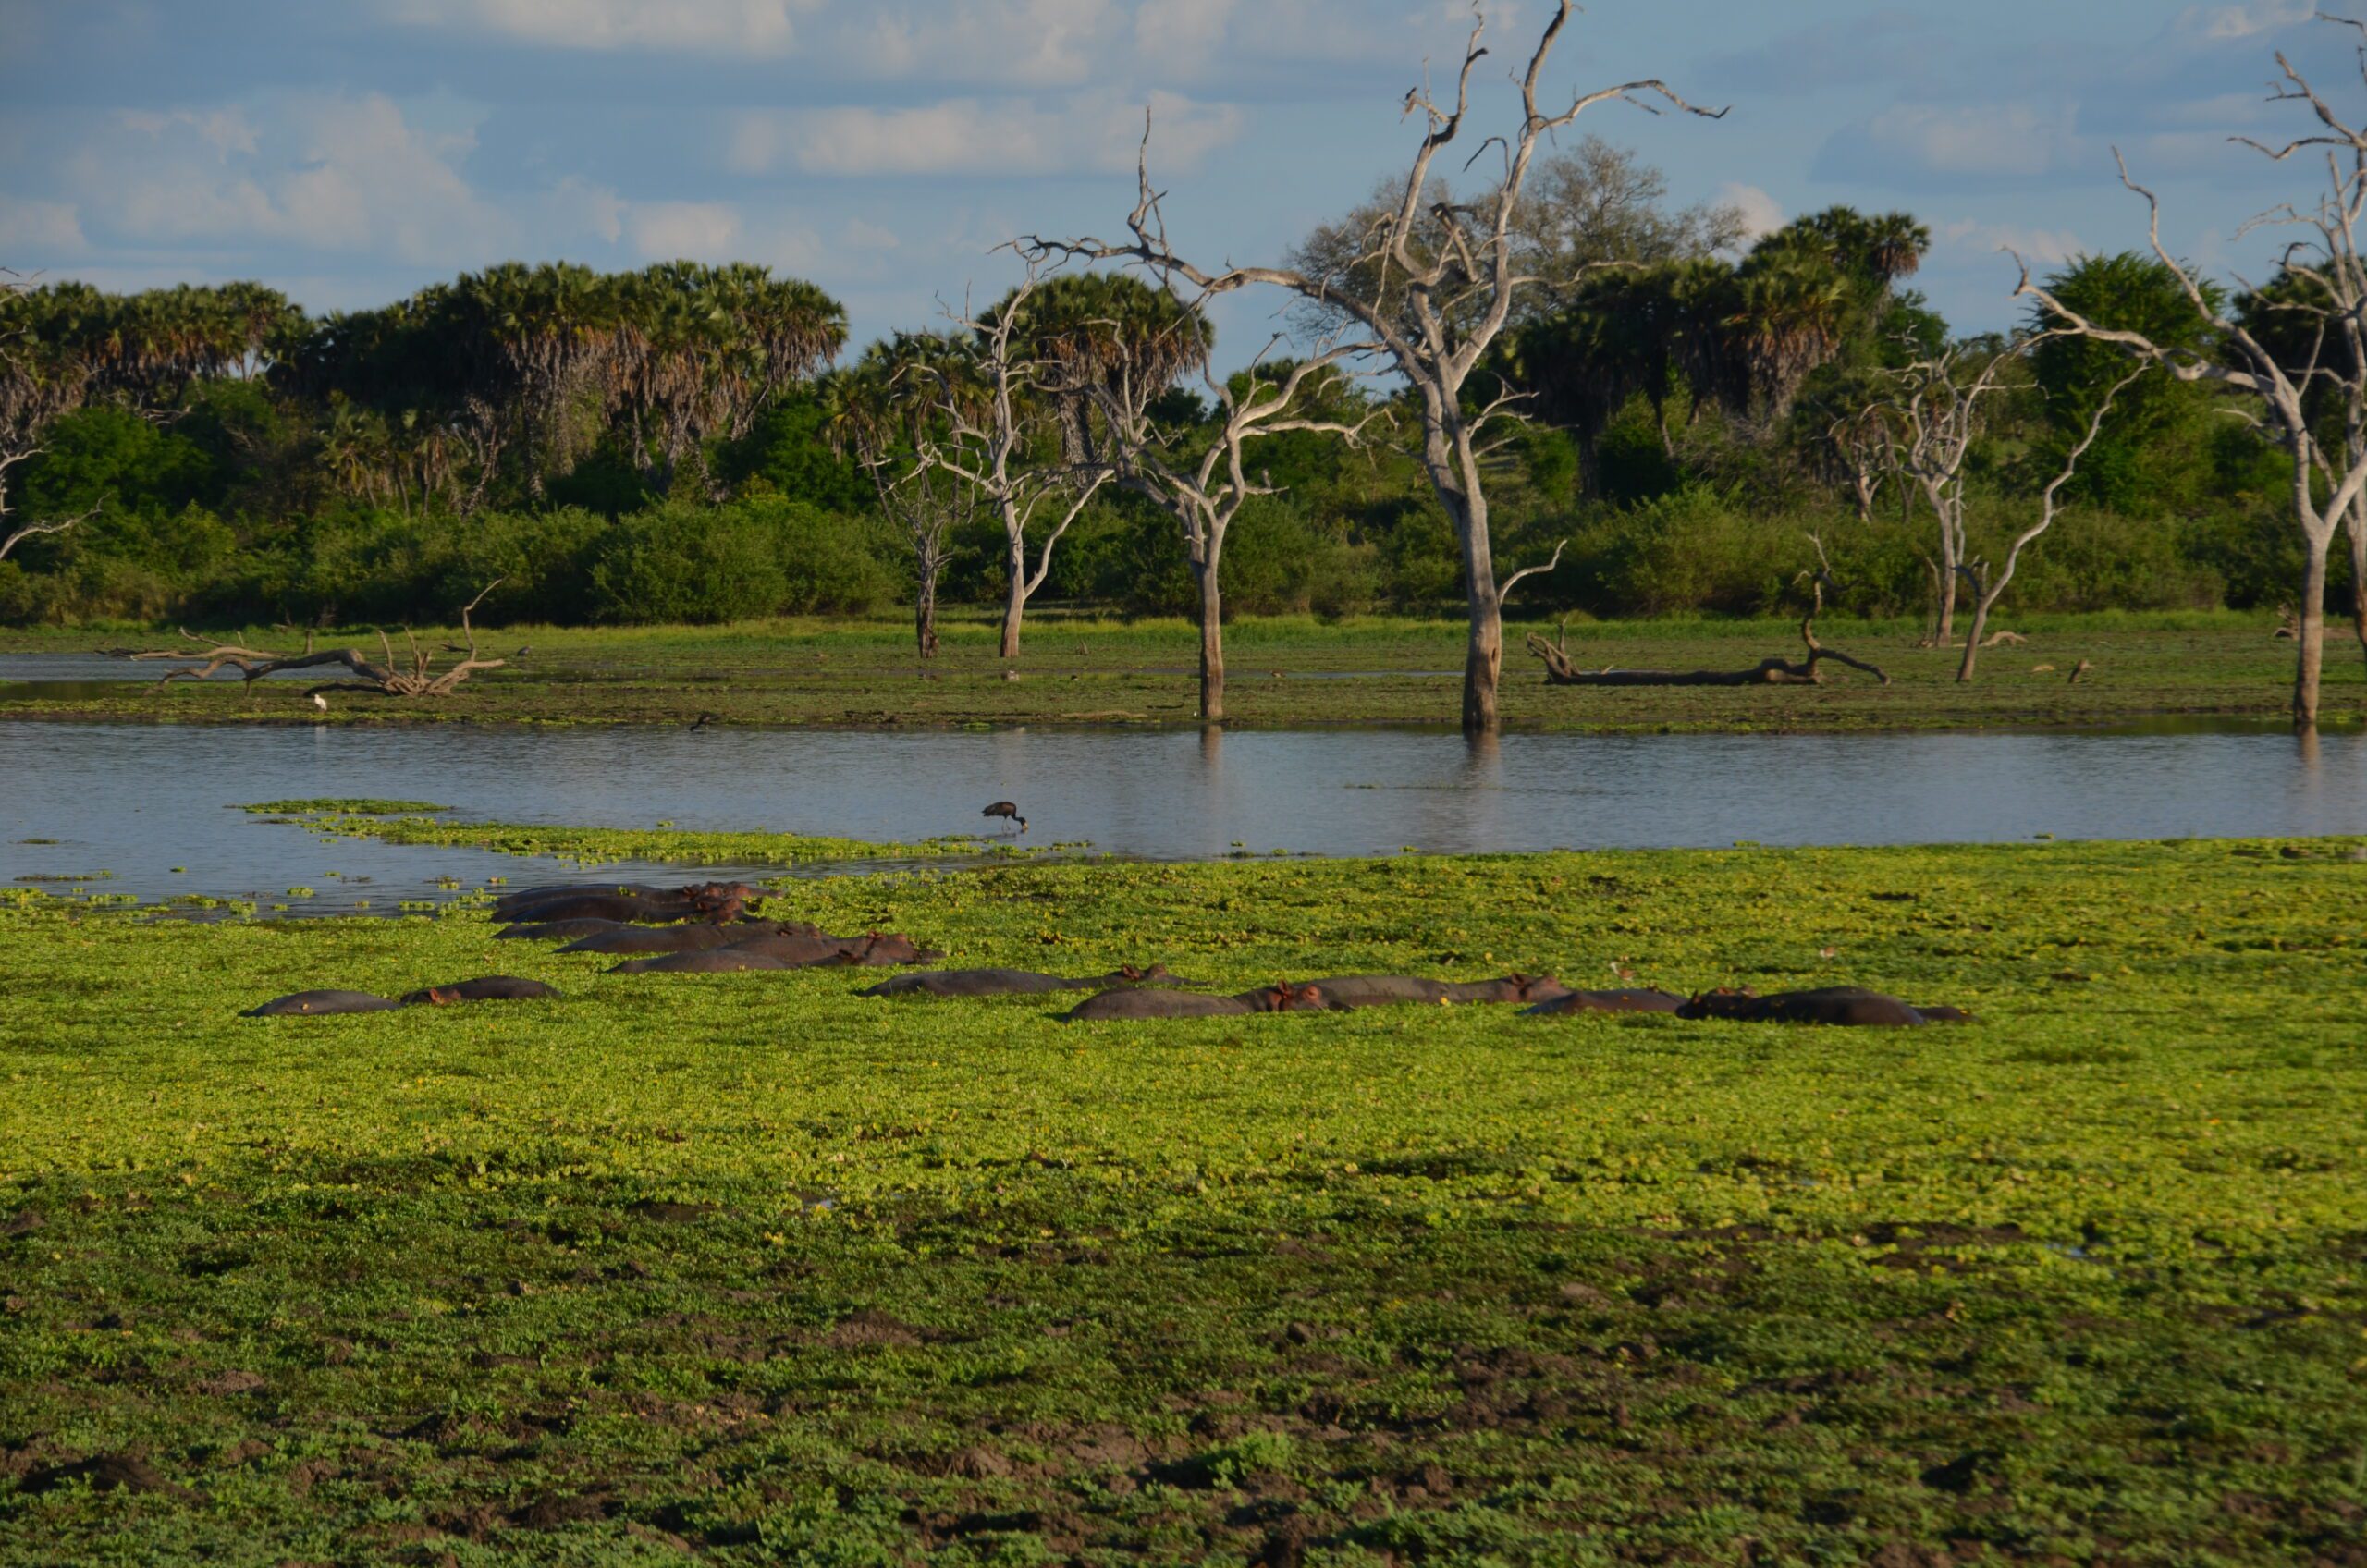 Insider Guide: 8 Things You Need to Know About Tanzania's Southern Circuit, Wetland, Hippos